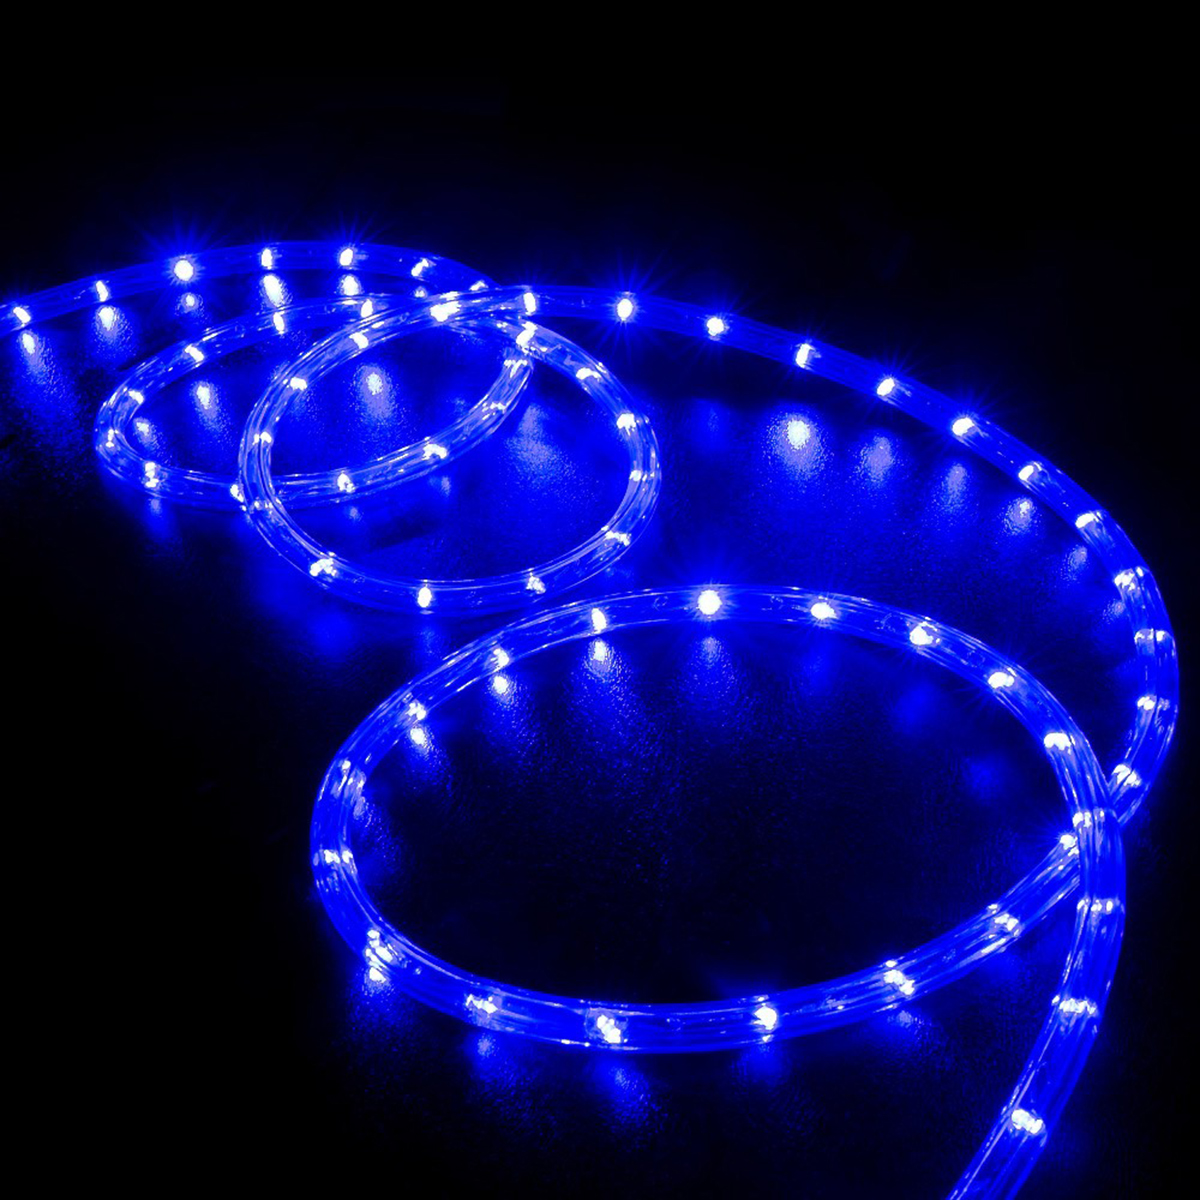 40 Ft Landscape Rope Lights with Remote LED Fairy Light for Halloween Xmas Indoor/Outdoor Party Wedding Garden Decor 4 Modes Blue - image 3 of 7